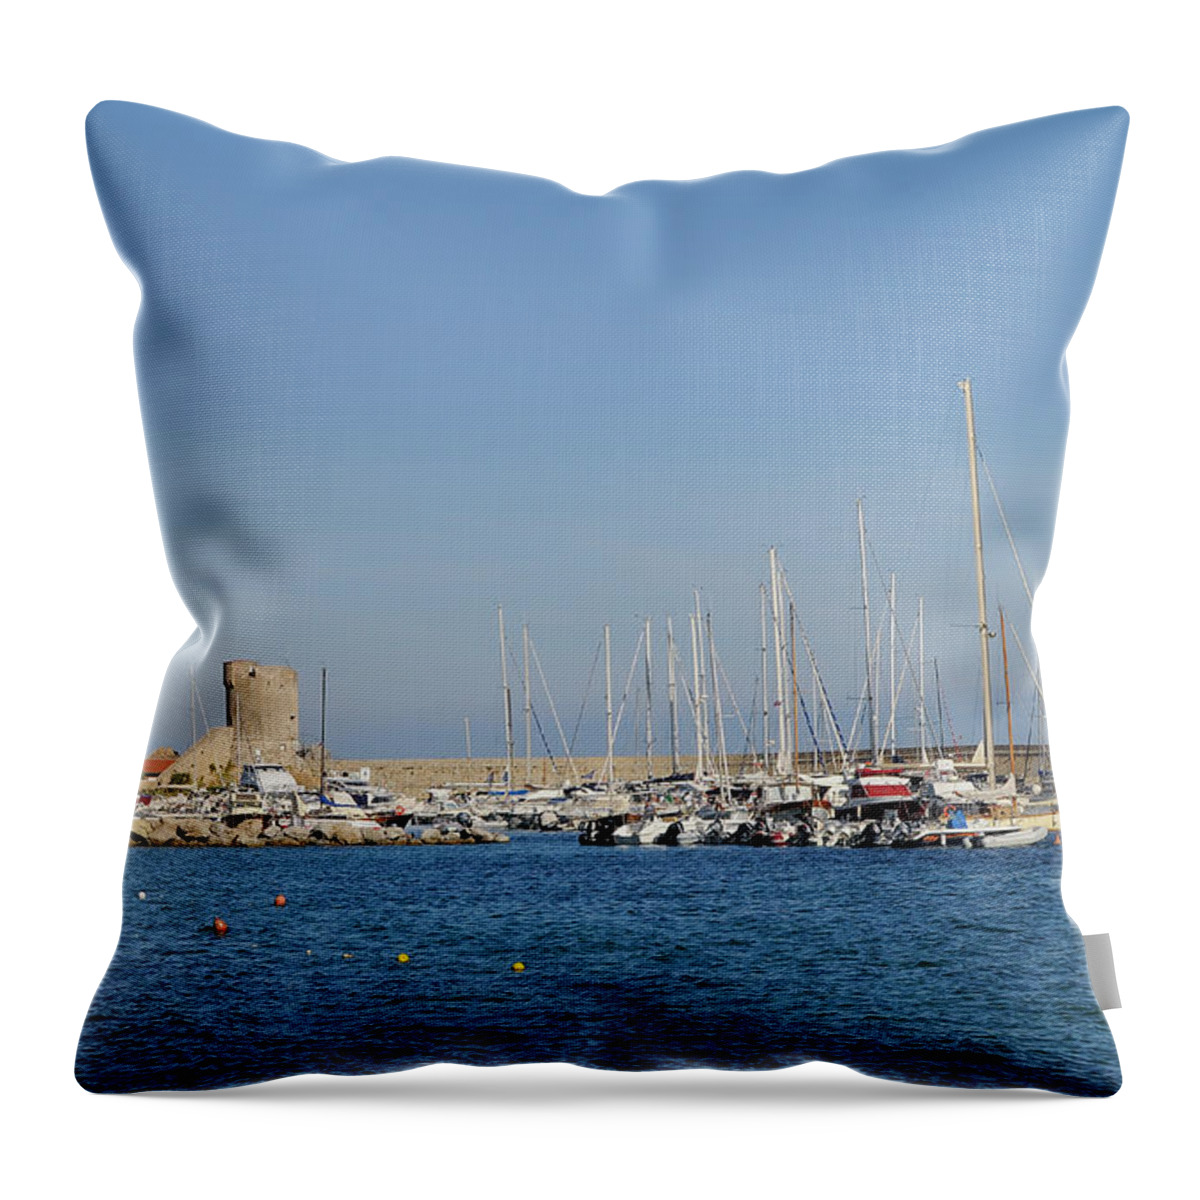 Tranquility Throw Pillow featuring the photograph Marciana Marina, Elba by Paolo Negri